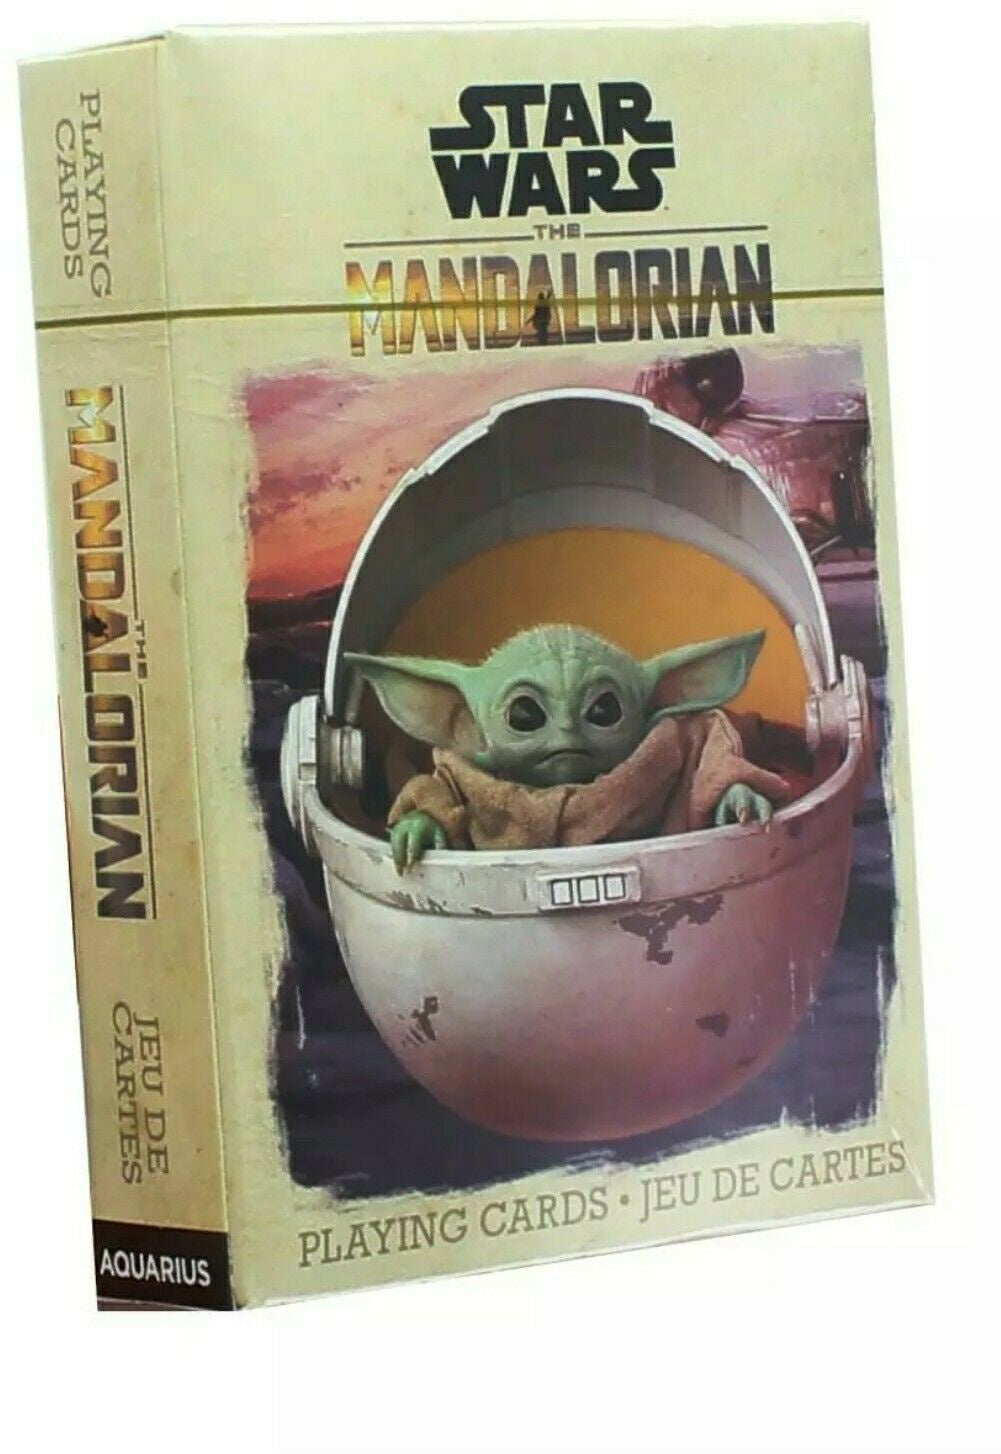 Star Wars: The Mandalorian - The Child - Playing Cards